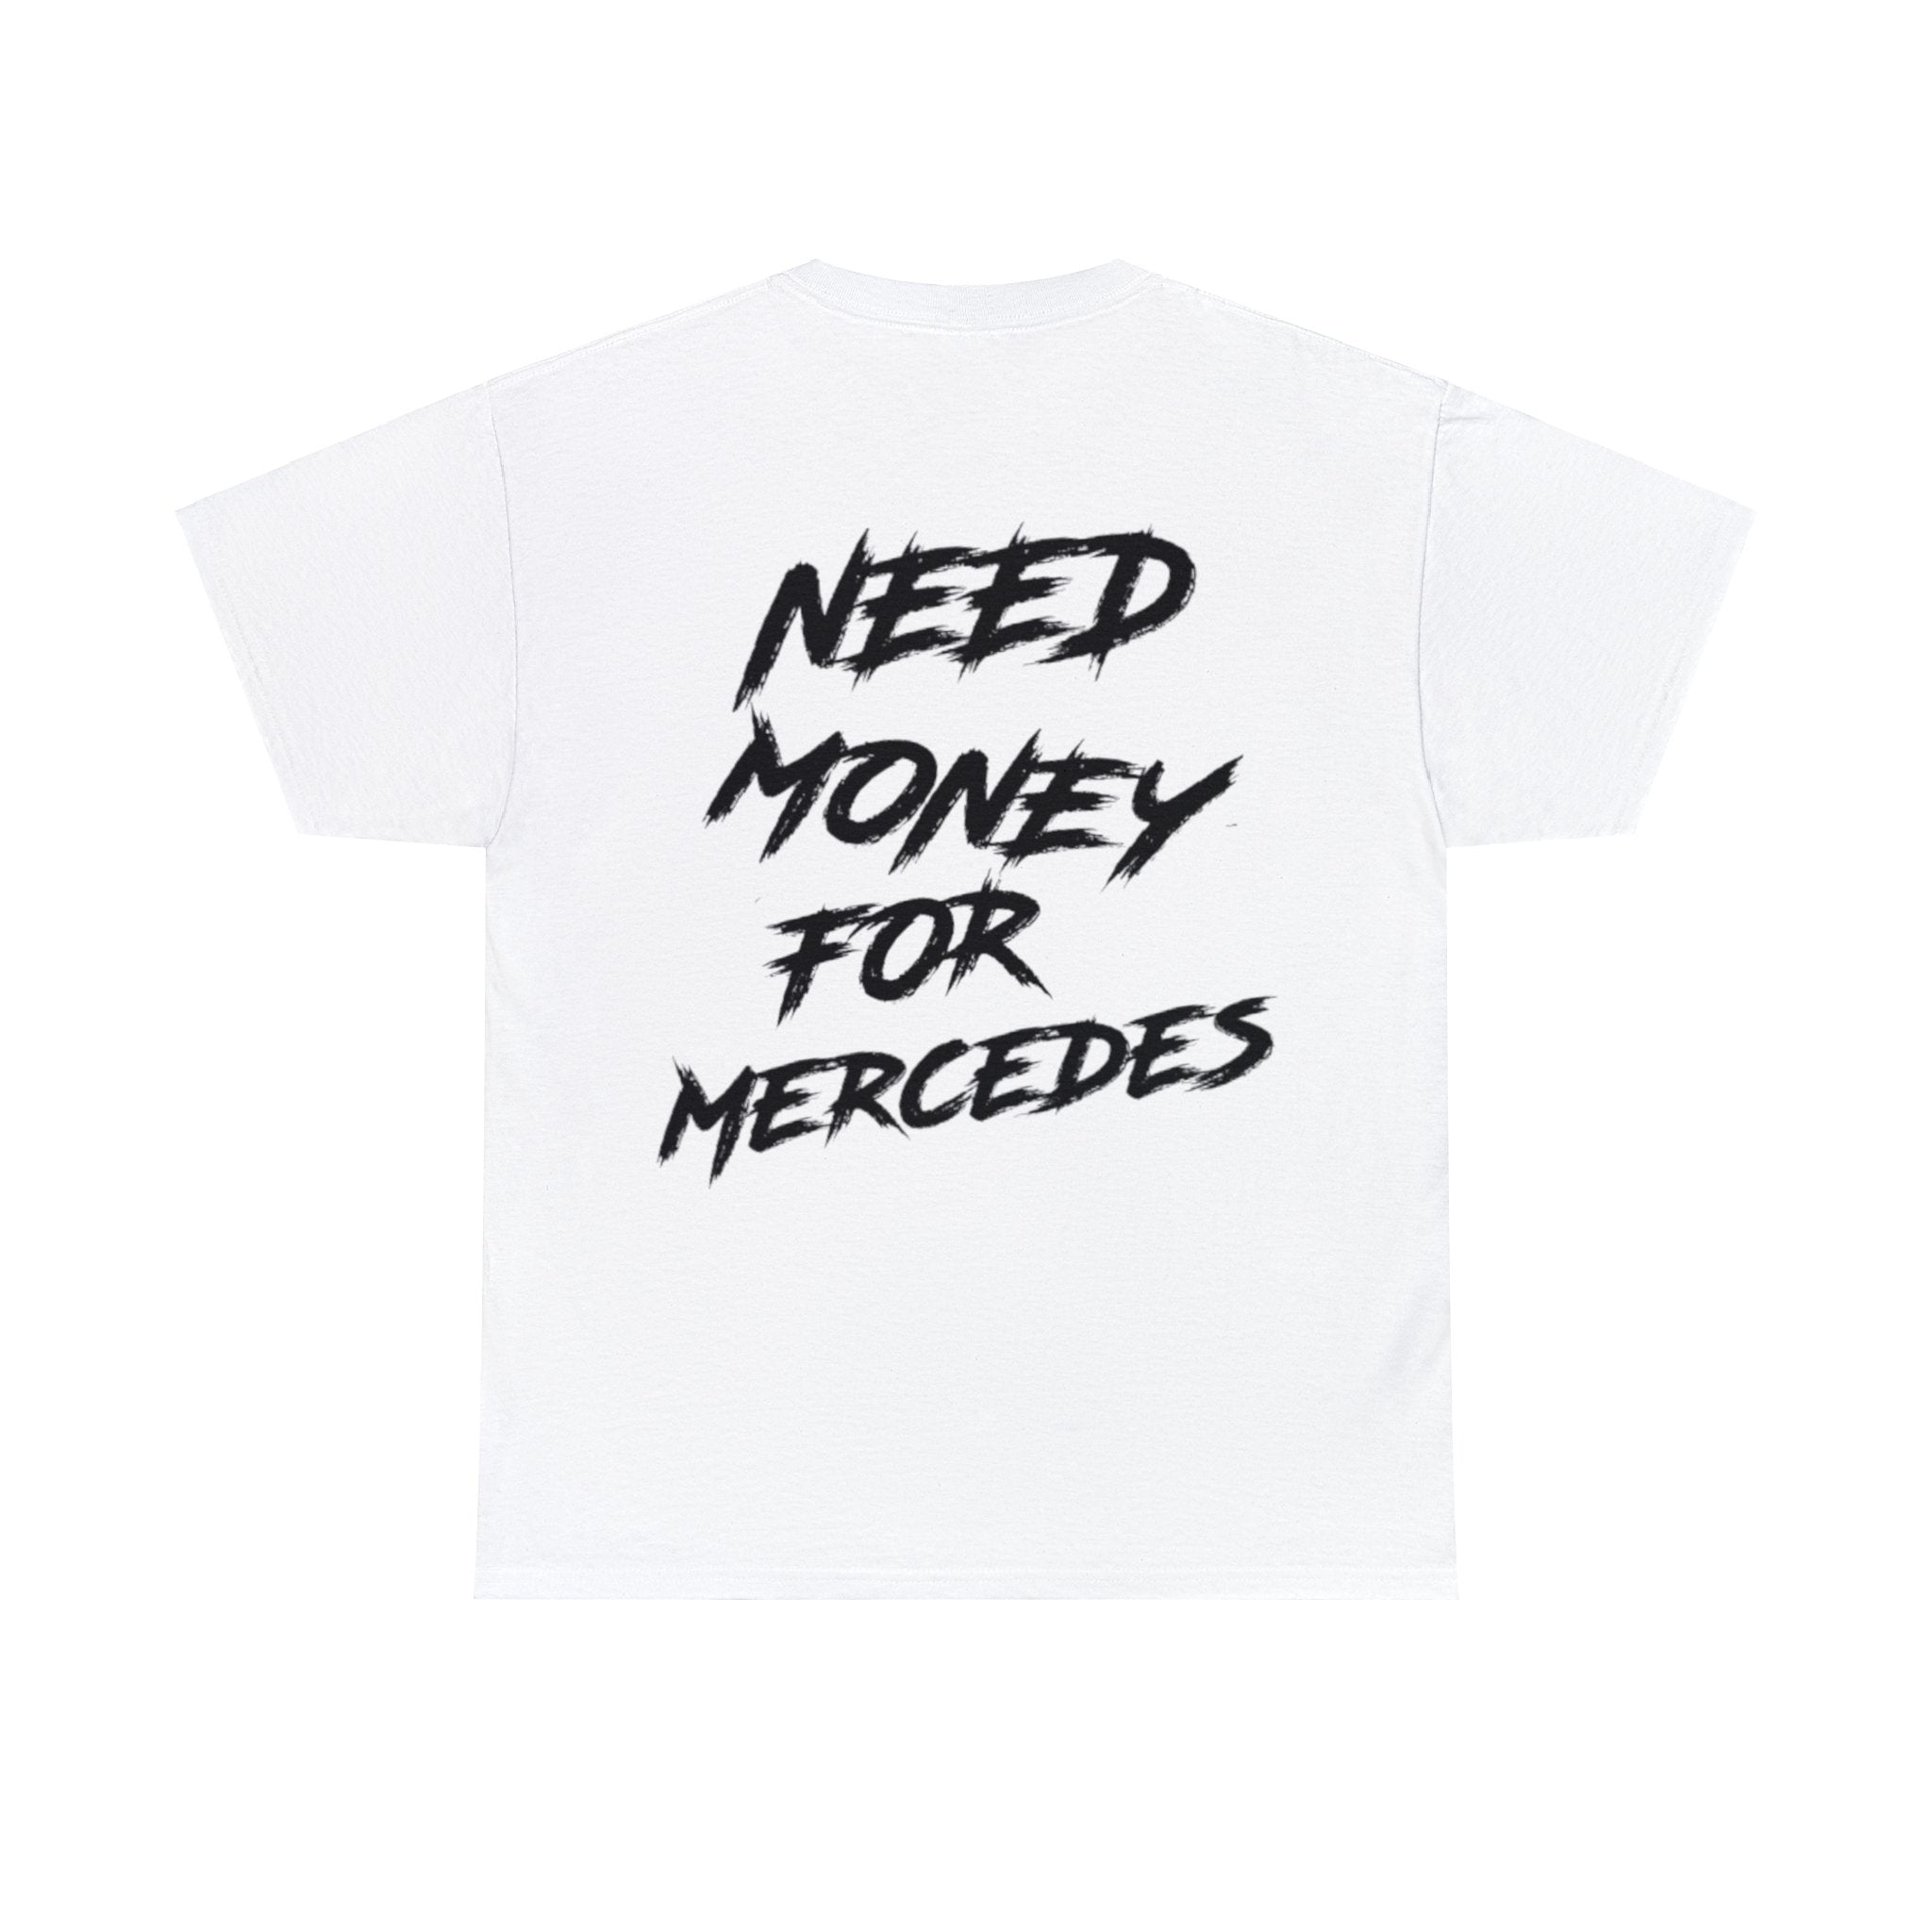 Need Money For Mercedes Shirt